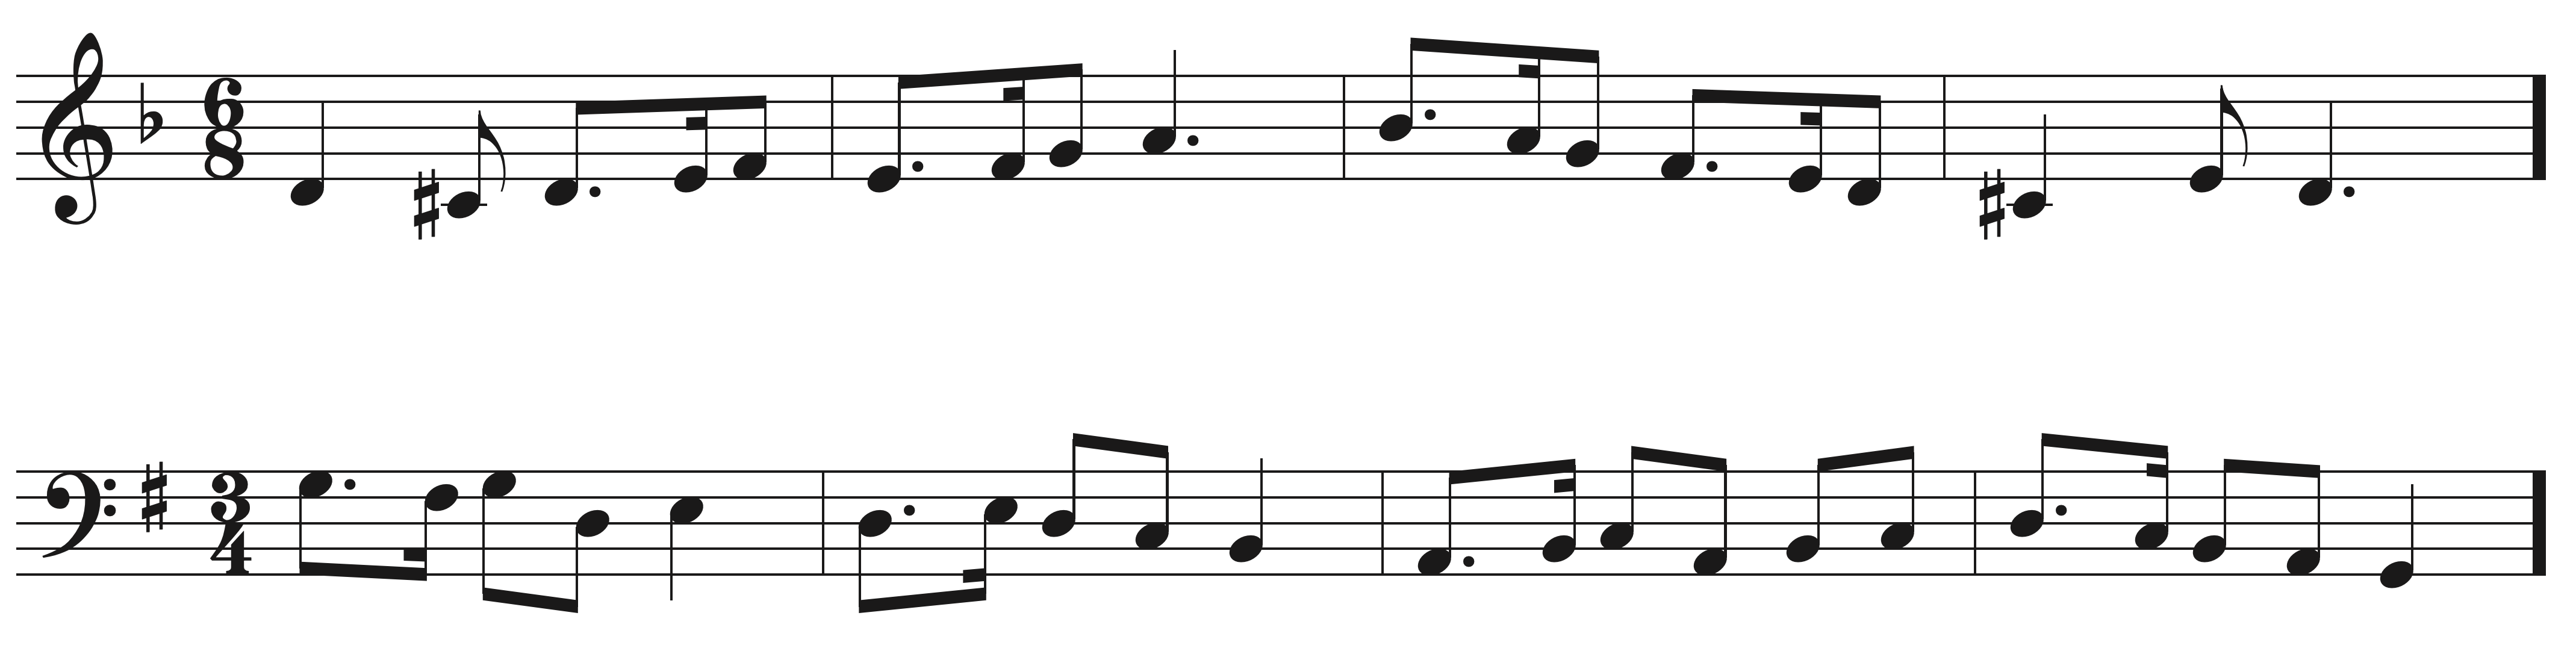 Melodic Material Range Structure Sight Singing exercise example